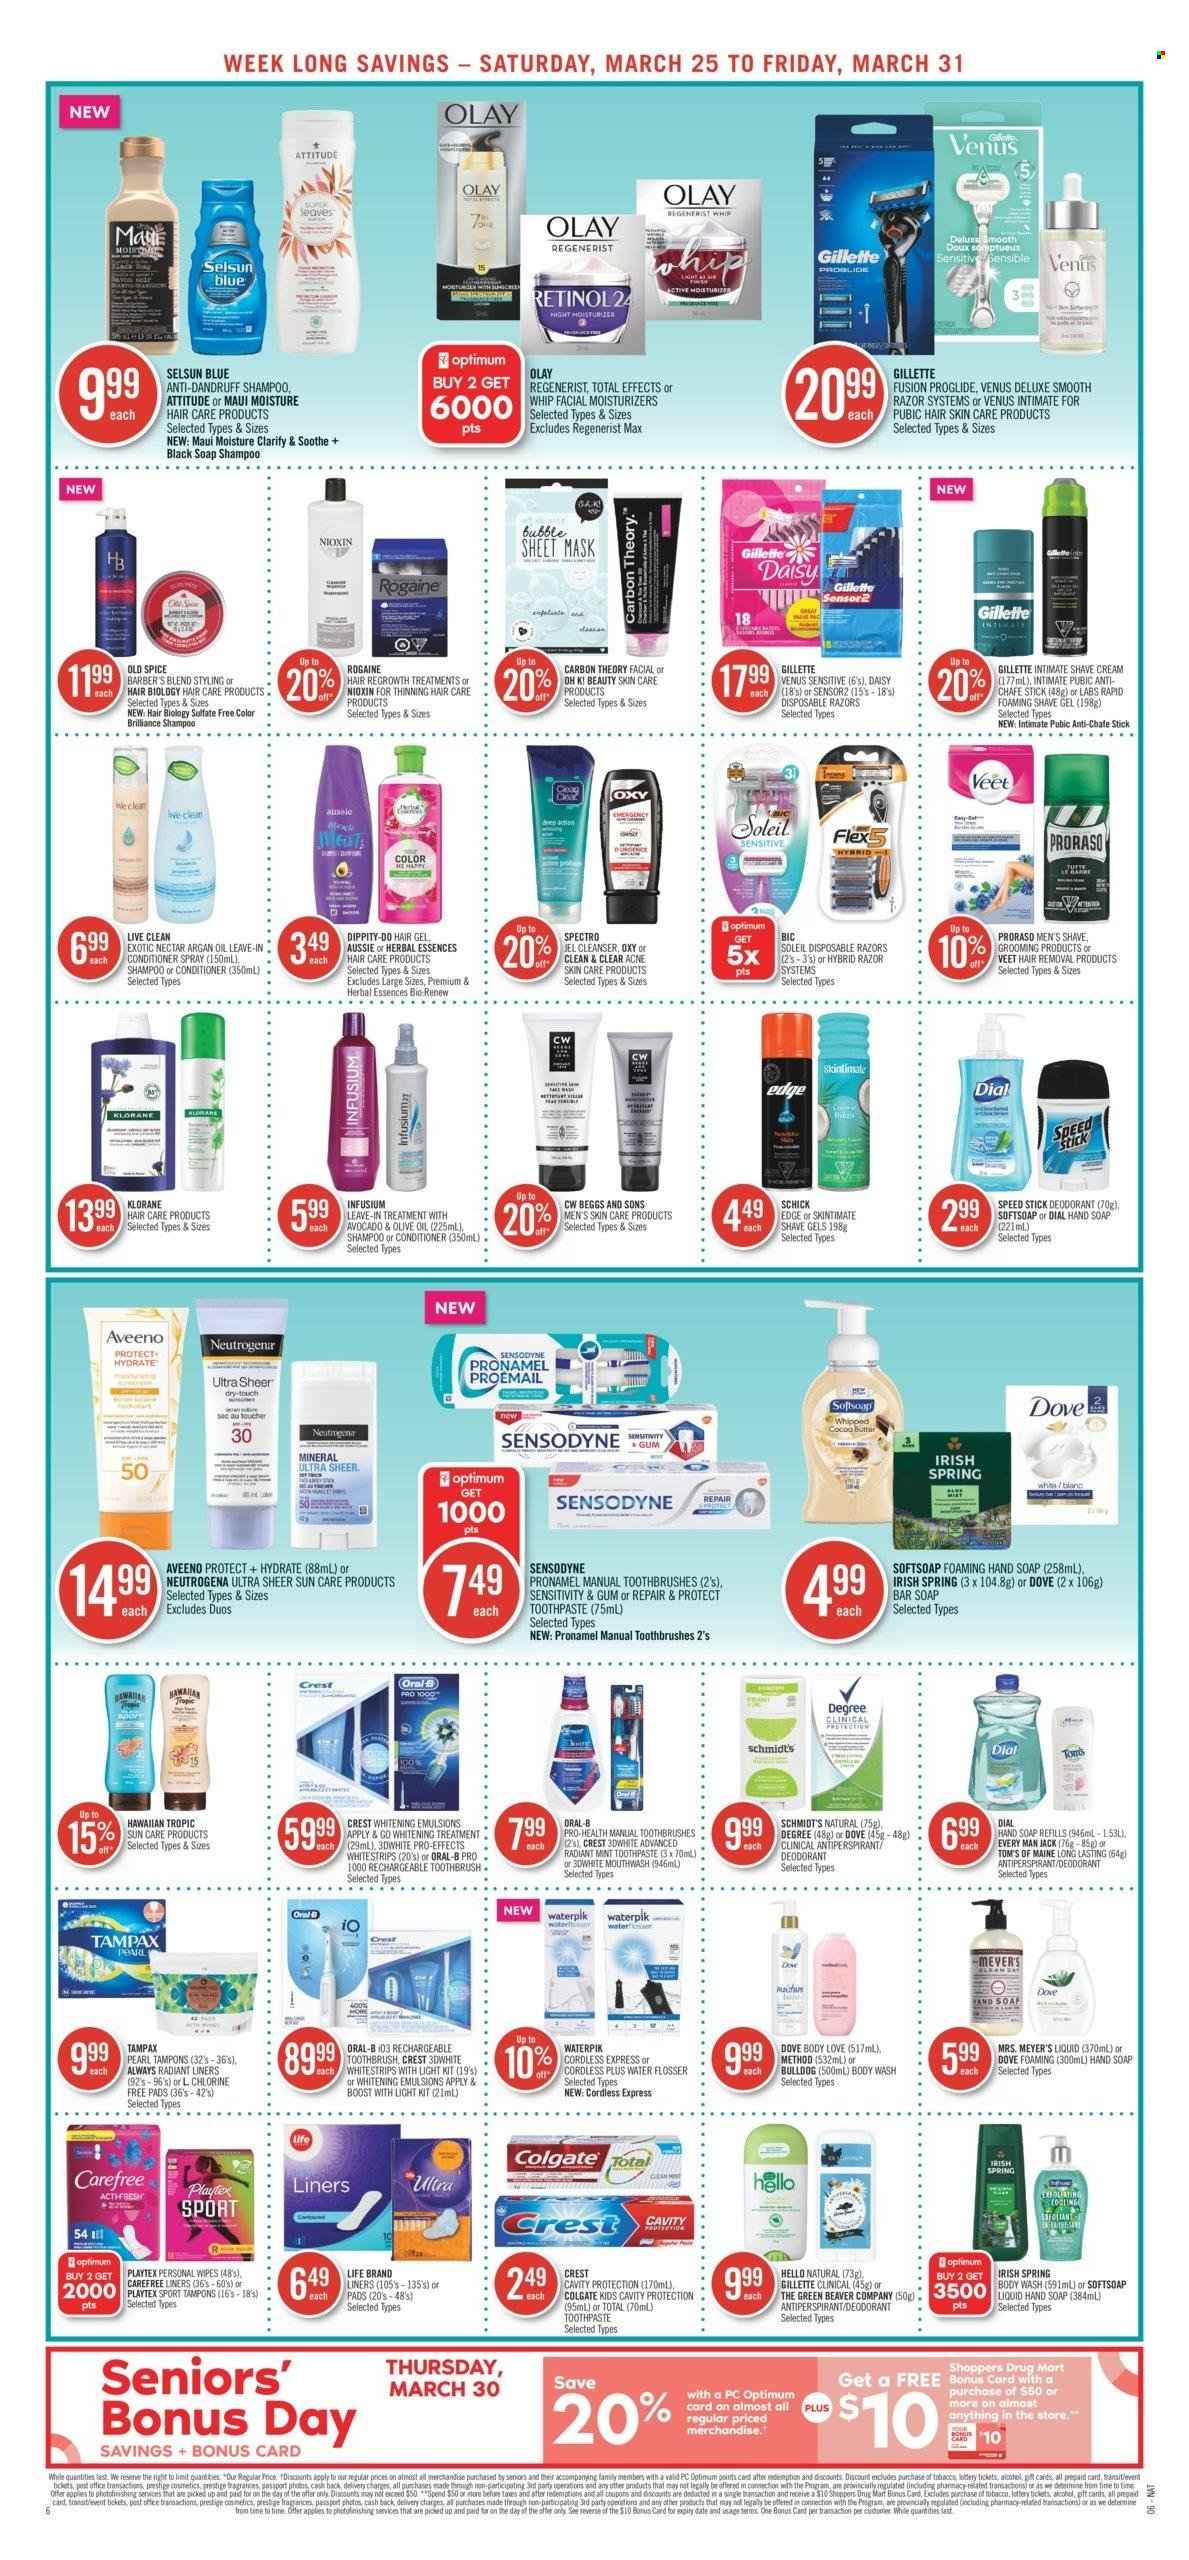 thumbnail - Shoppers Drug Mart Flyer - March 25, 2023 - March 31, 2023 - Sales products - Dove, cocoa, spice, olive oil, water, Boost, wipes, Aveeno, body wash, Softsoap, hand soap, soap bar, Dial, soap, toothbrush, toothpaste, mouthwash, Crest, Playtex, Carefree, tampons, cleanser, Gillette, moisturizer, Olay, Clean & Clear, Aussie, conditioner, Herbal Essences, Klorane, Maui Moisture, anti-perspirant, Speed Stick, BIC, razor, shave gel, Schick, Venus, hair removal, Veet, shave cream, disposable razor, pot, pan, Optimum, argan oil, alcohol, Colgate, Neutrogena, shampoo, Tampax, Old Spice, Oral-B, Sensodyne, deodorant. Page 11.